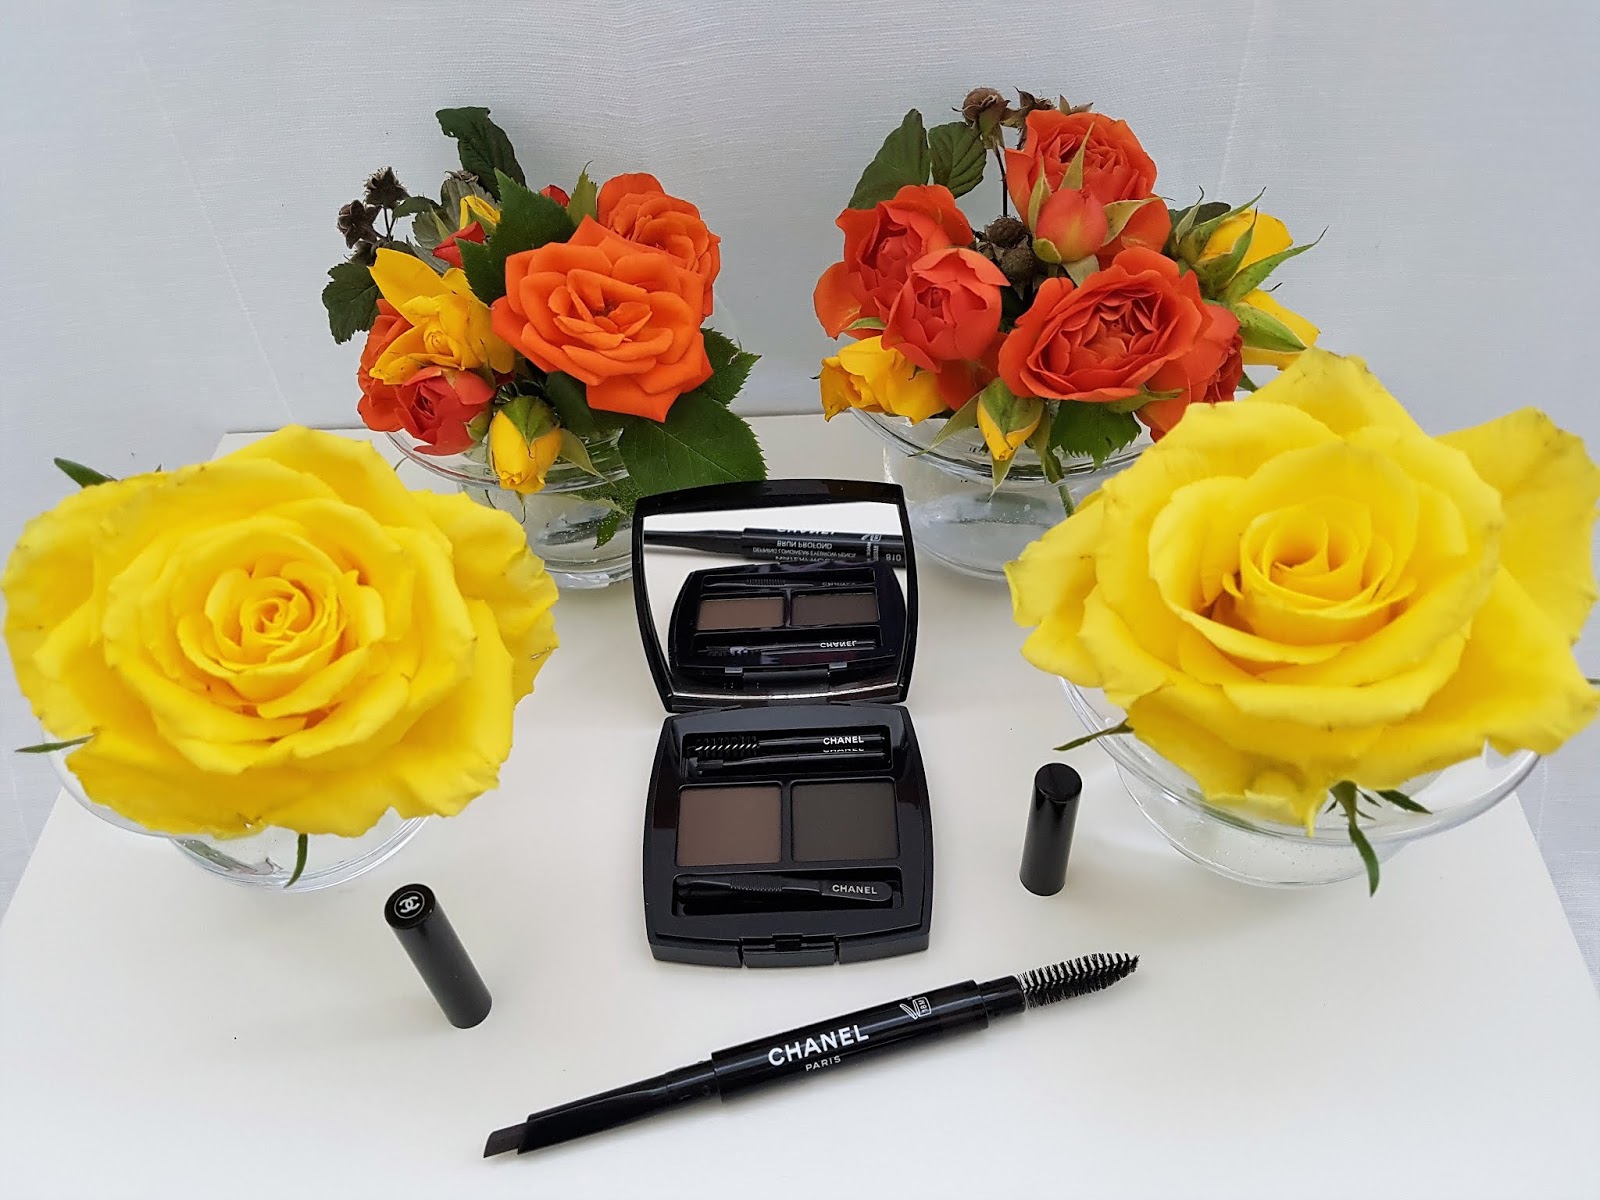 THE EXCLUSIVE BEAUTY DIARY : CHANEL LA PALETTE SOURCILS – BROW POWDER DUO & STYLO  SOURCILS WATERPROOF DEFINING EYEBROW PENCIL